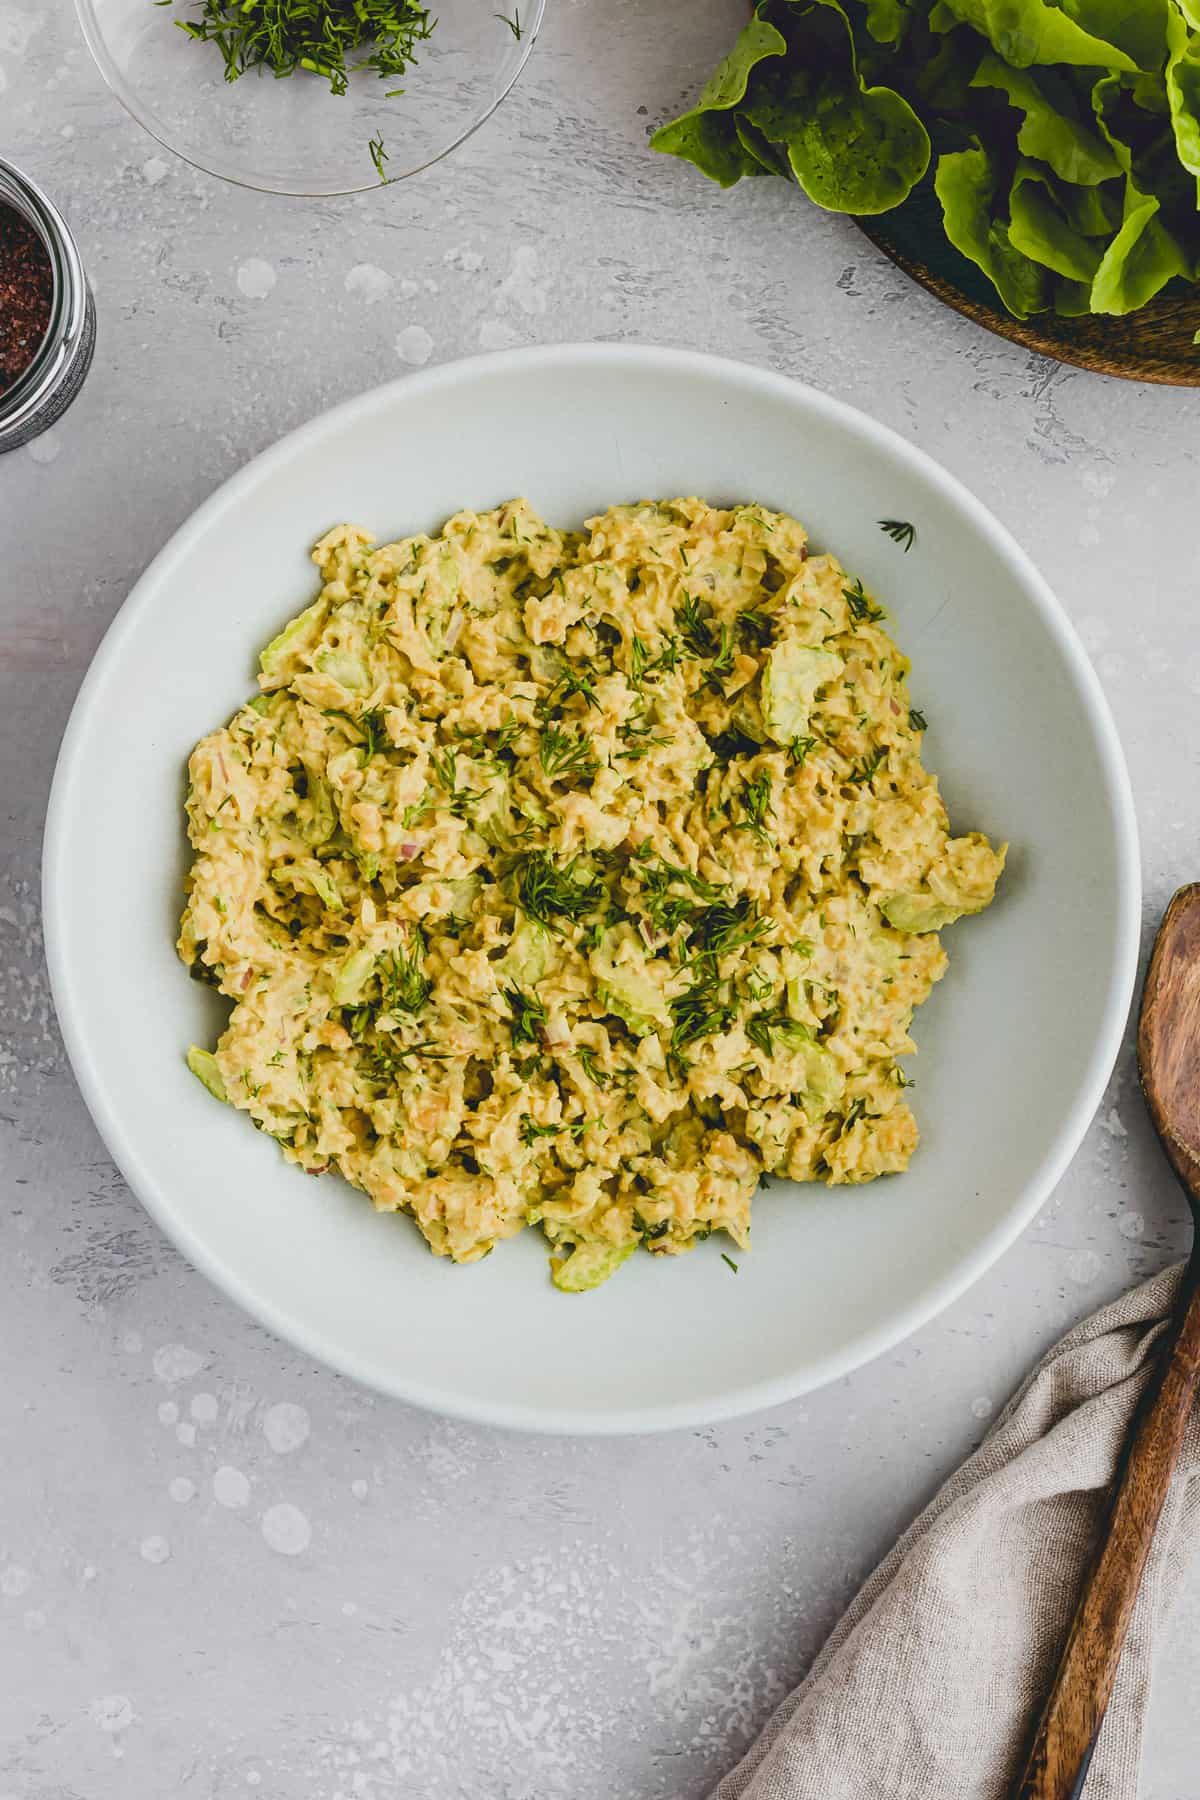 Vegan Chickpea Egg Salad in a bowl with a wooden spoon